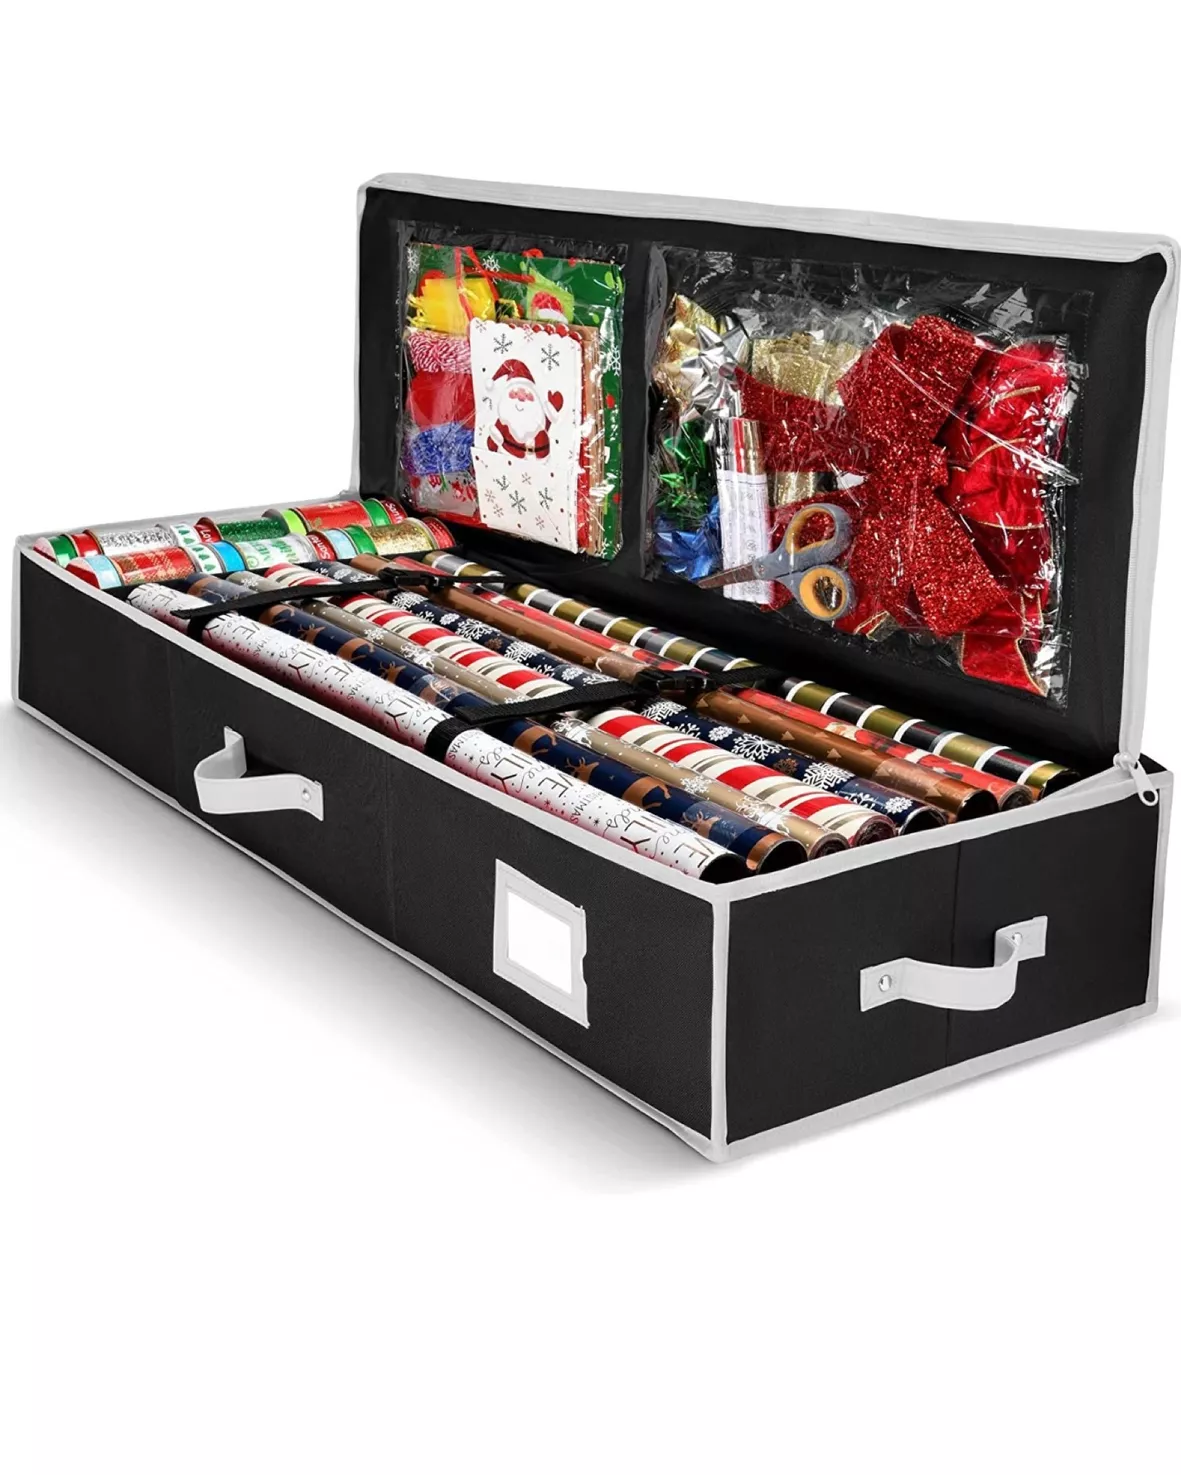 Get the Zober Wrapping Paper Organizer Starting at $30 on